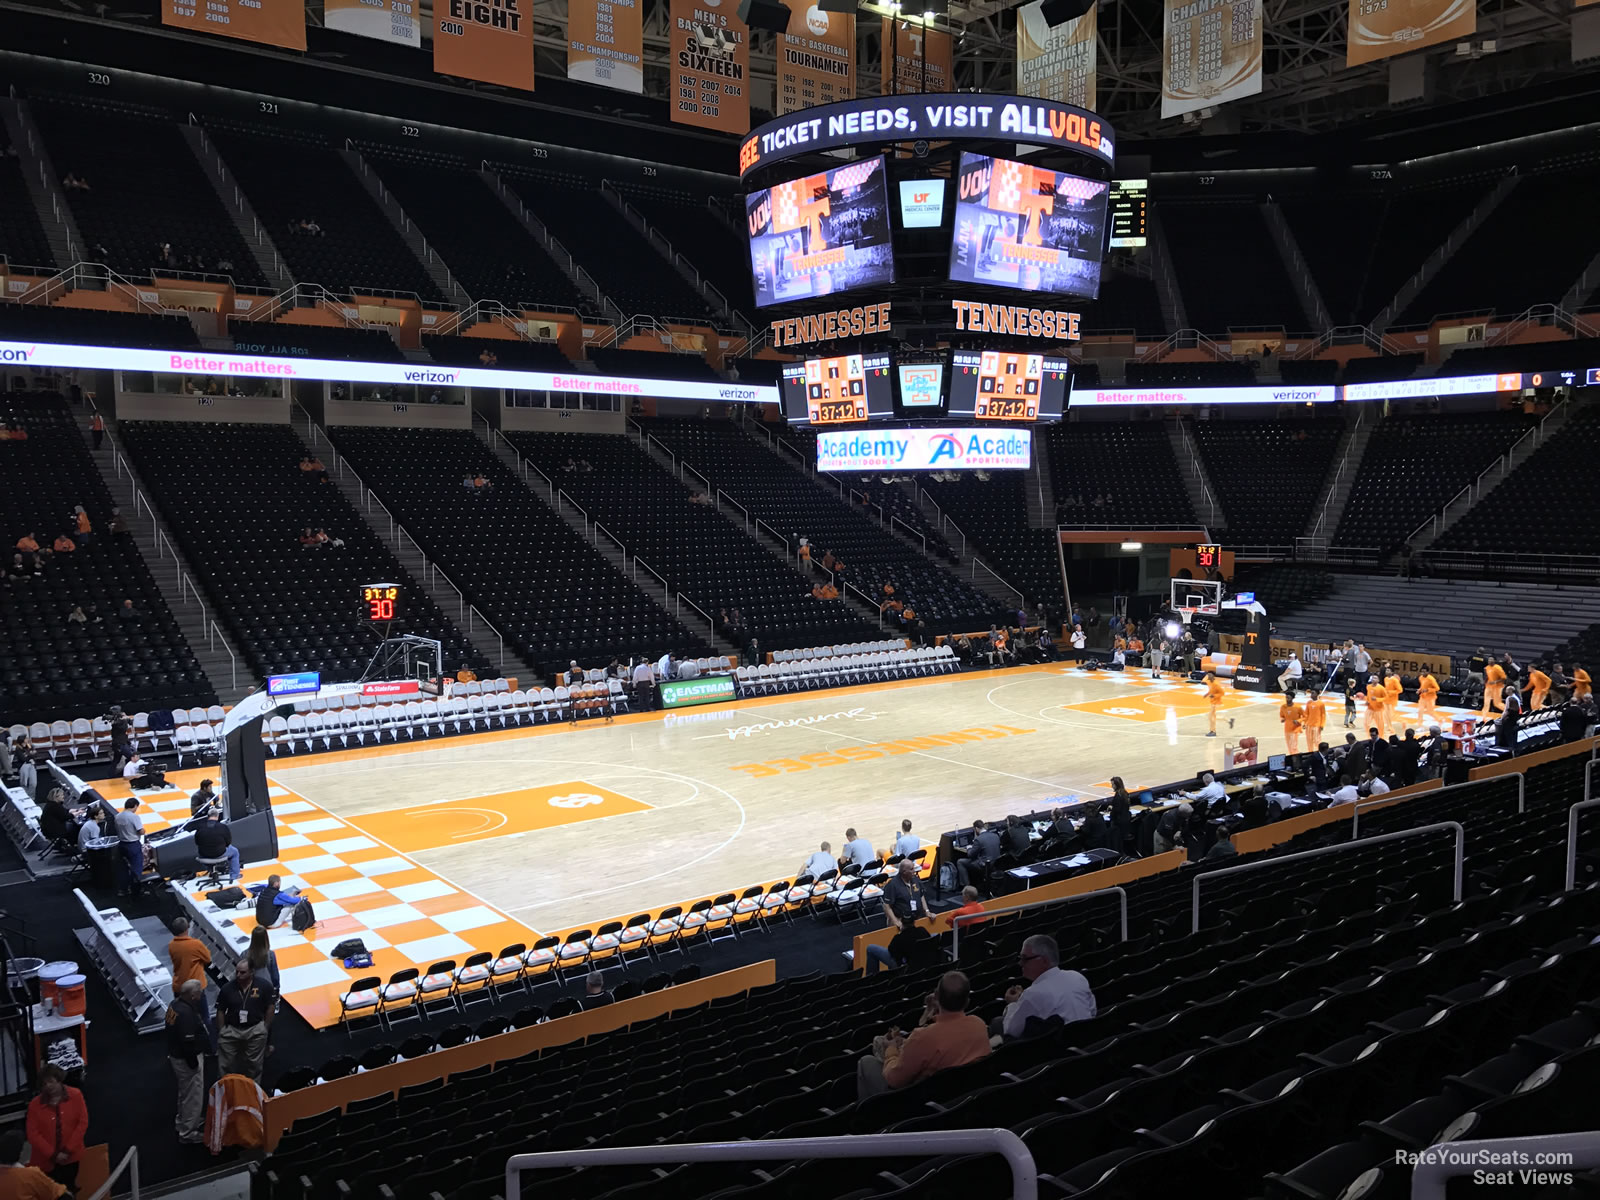 section 108, row 17 seat view  - thompson-boling arena